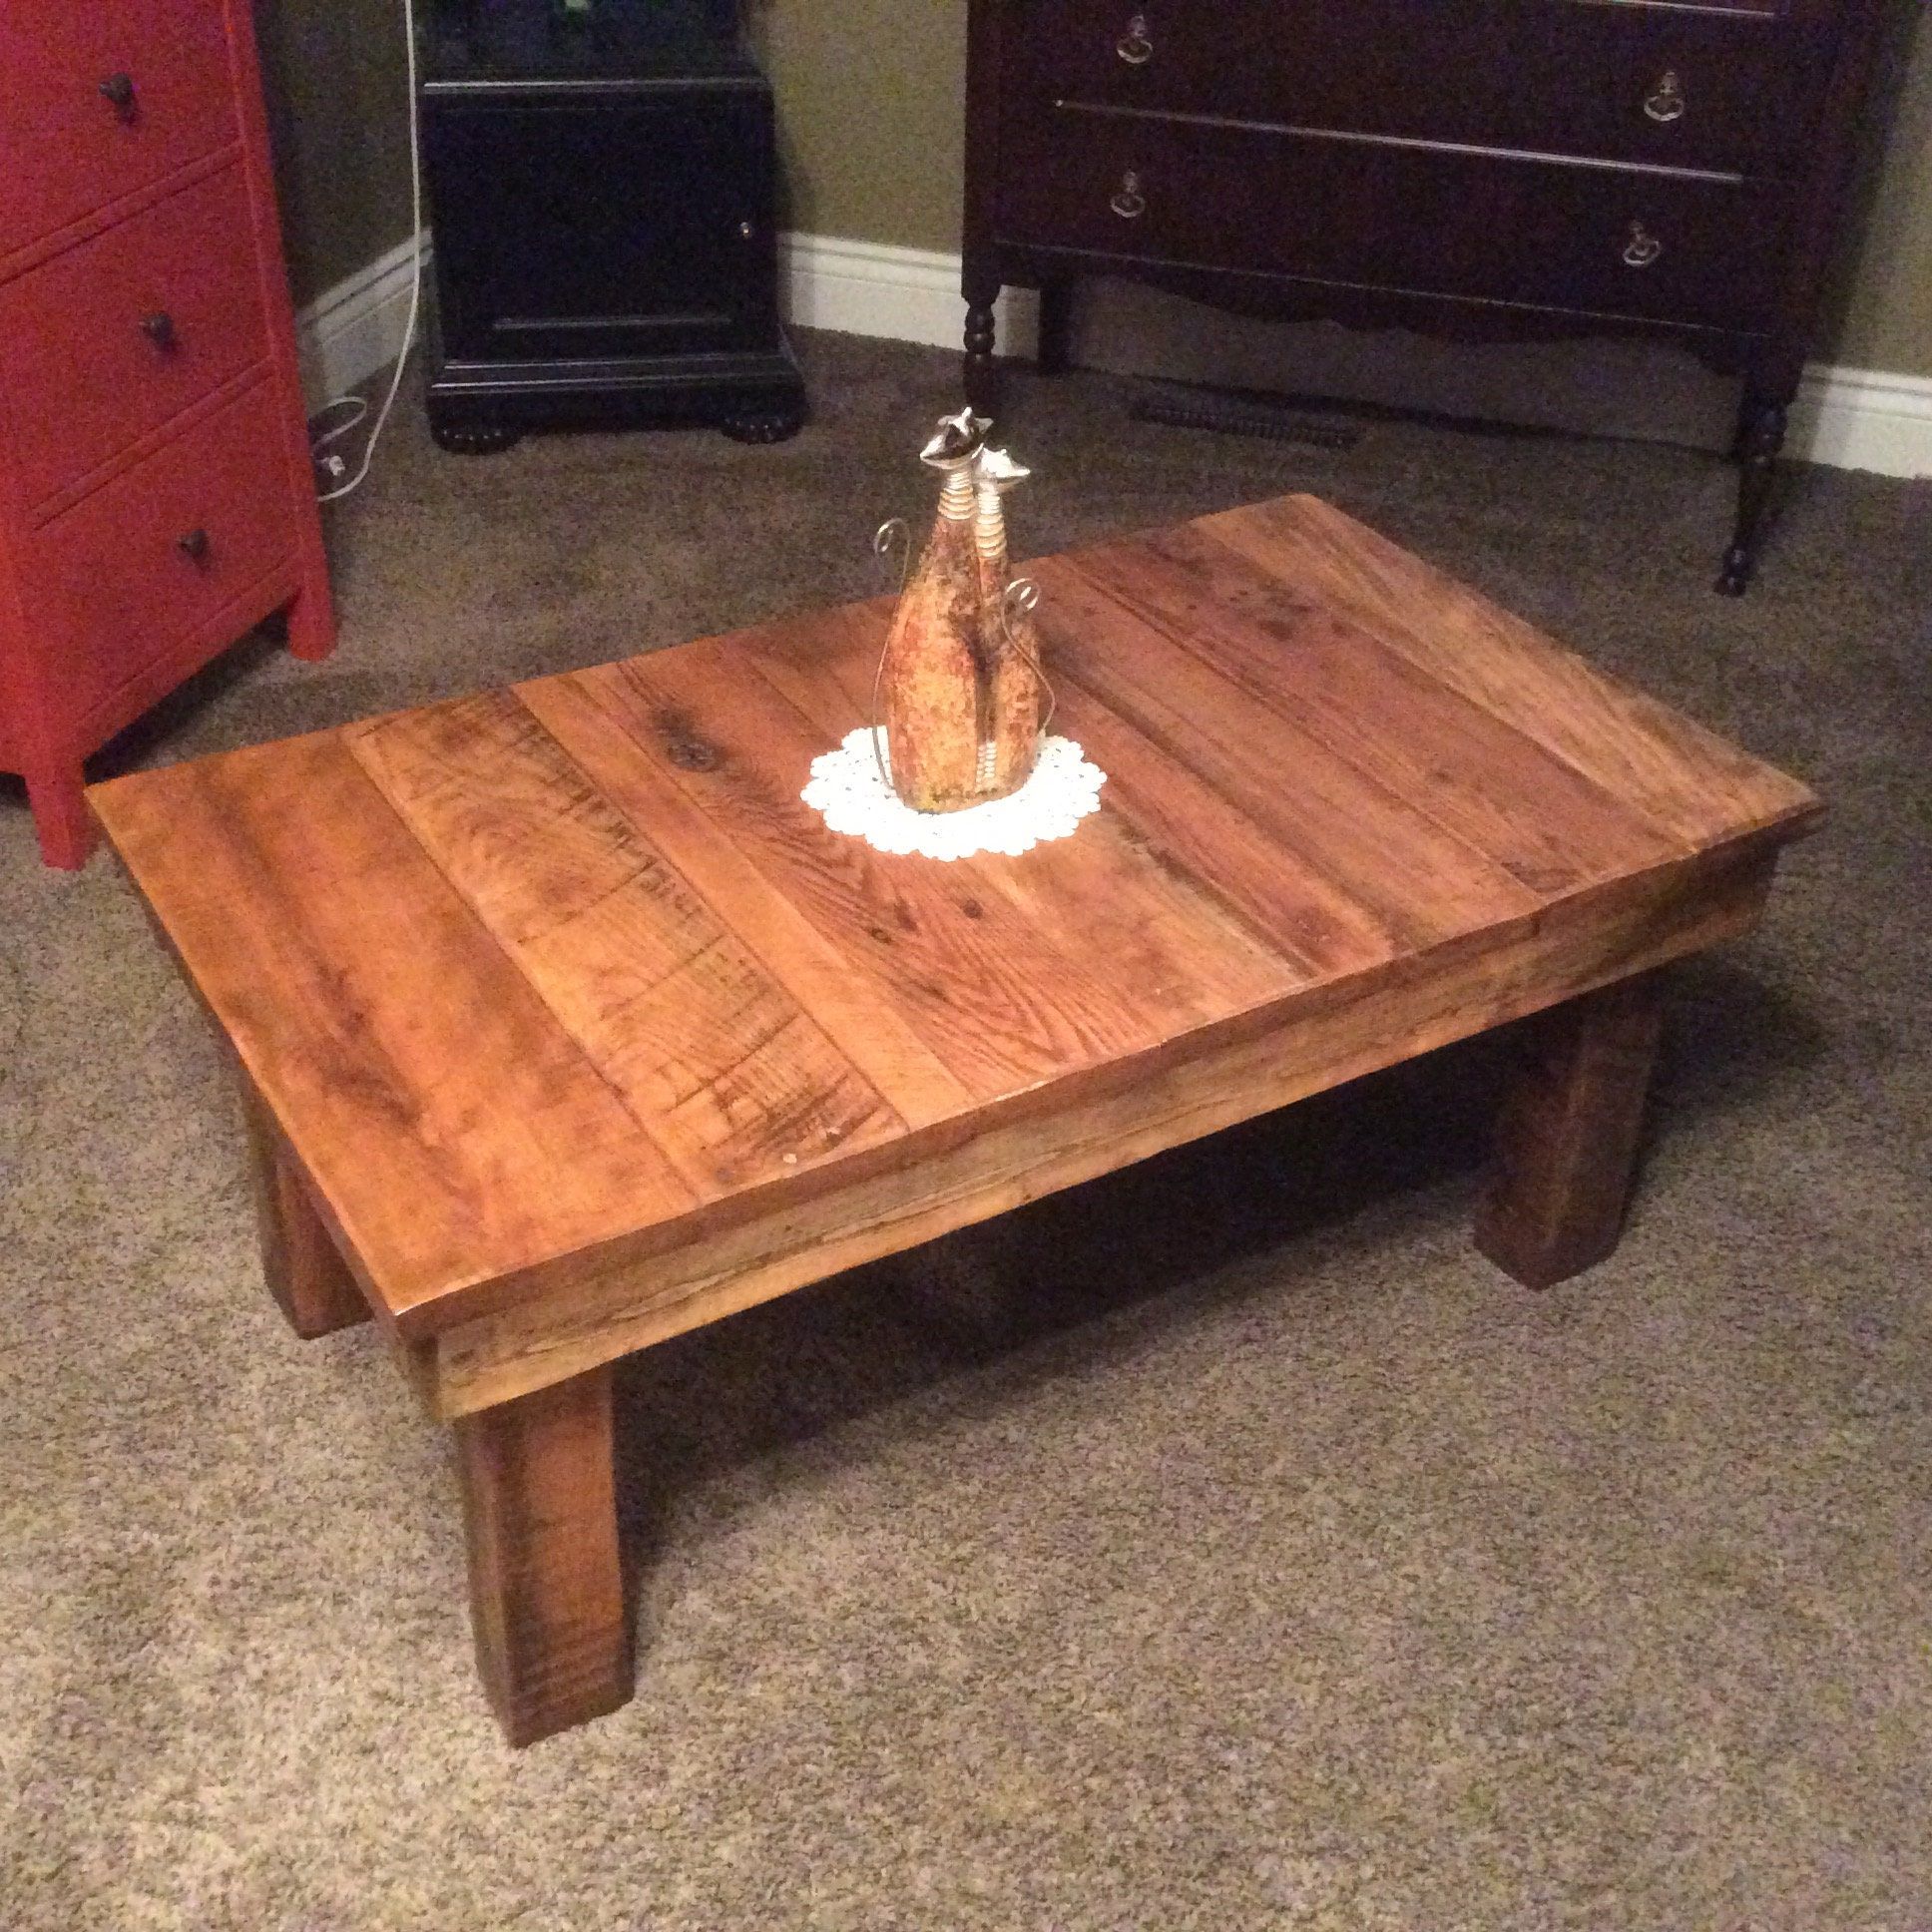 Reclaimed Wood Rustic Coffee Table Pertaining To Favorite Barnwood Coffee Tables (Gallery 3 of 20)